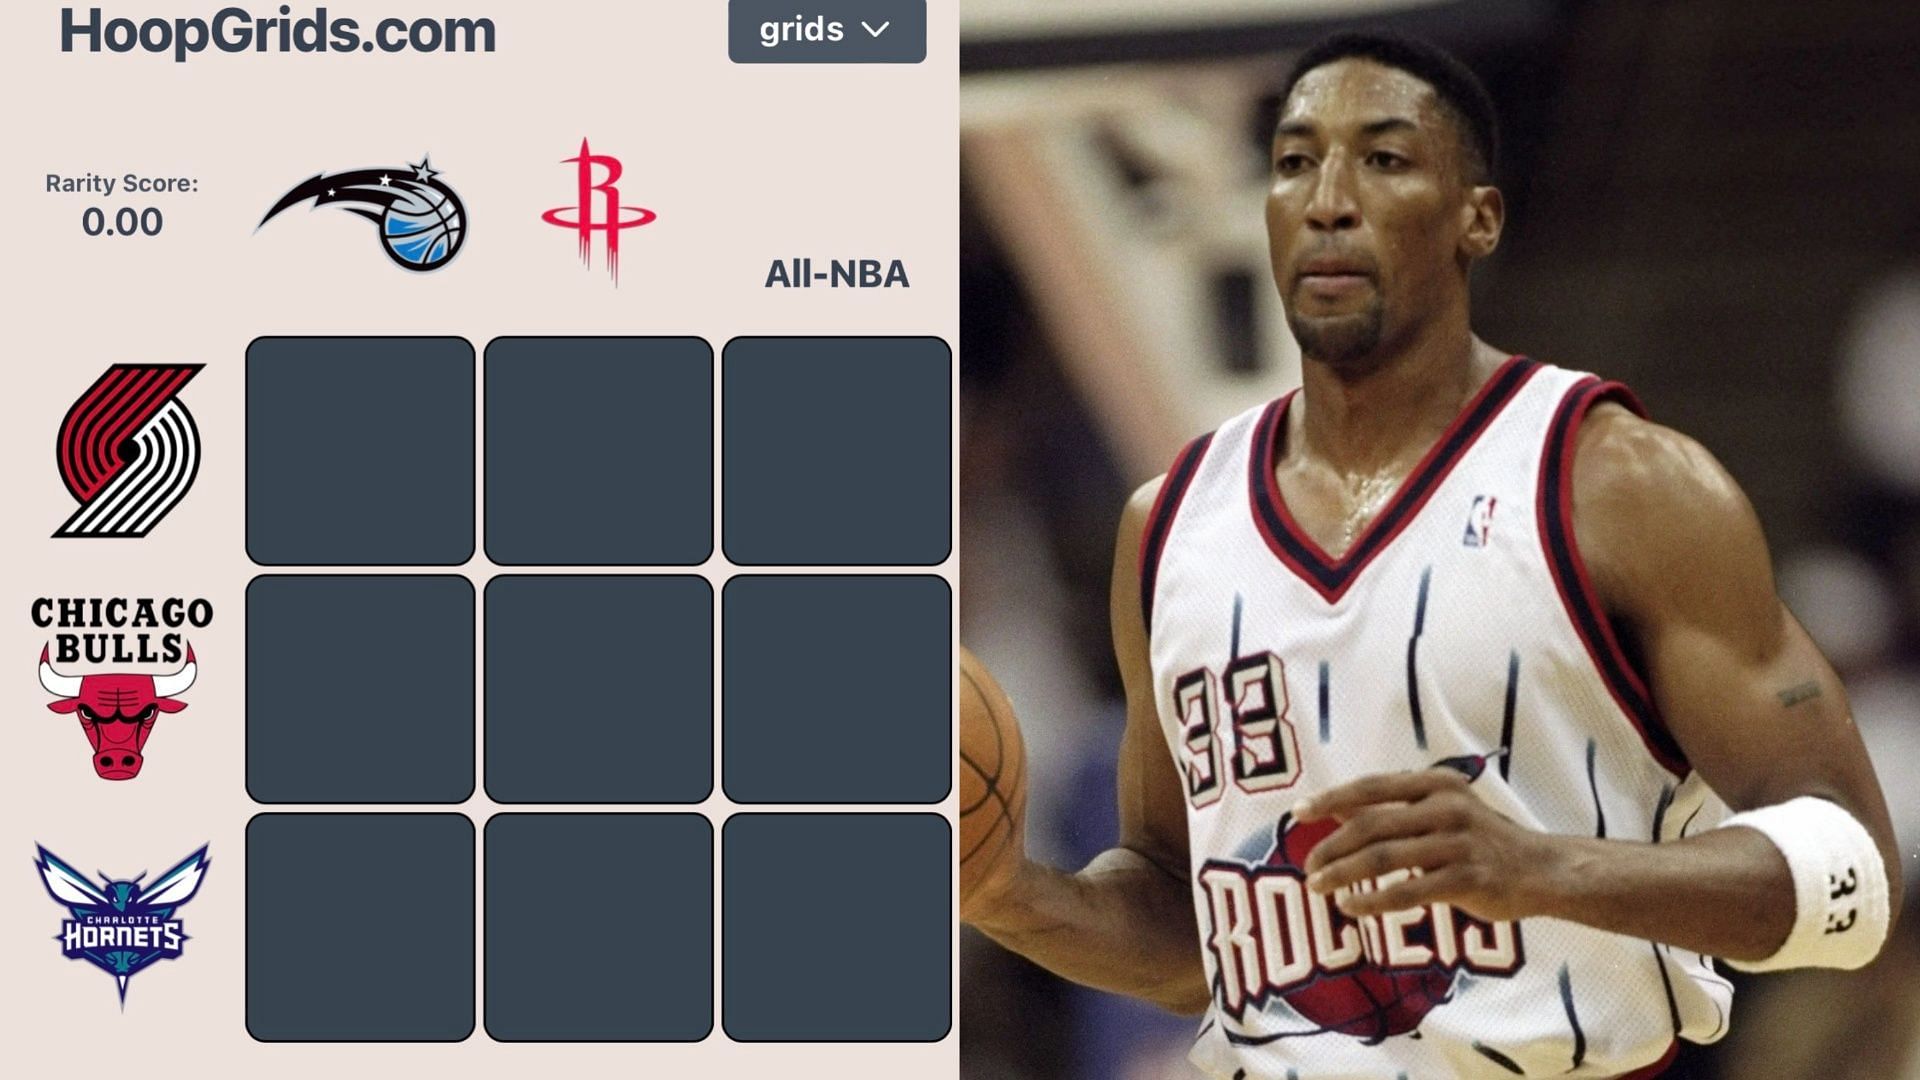 NBA HoopGrids (July 18) and Scottie Pippen.